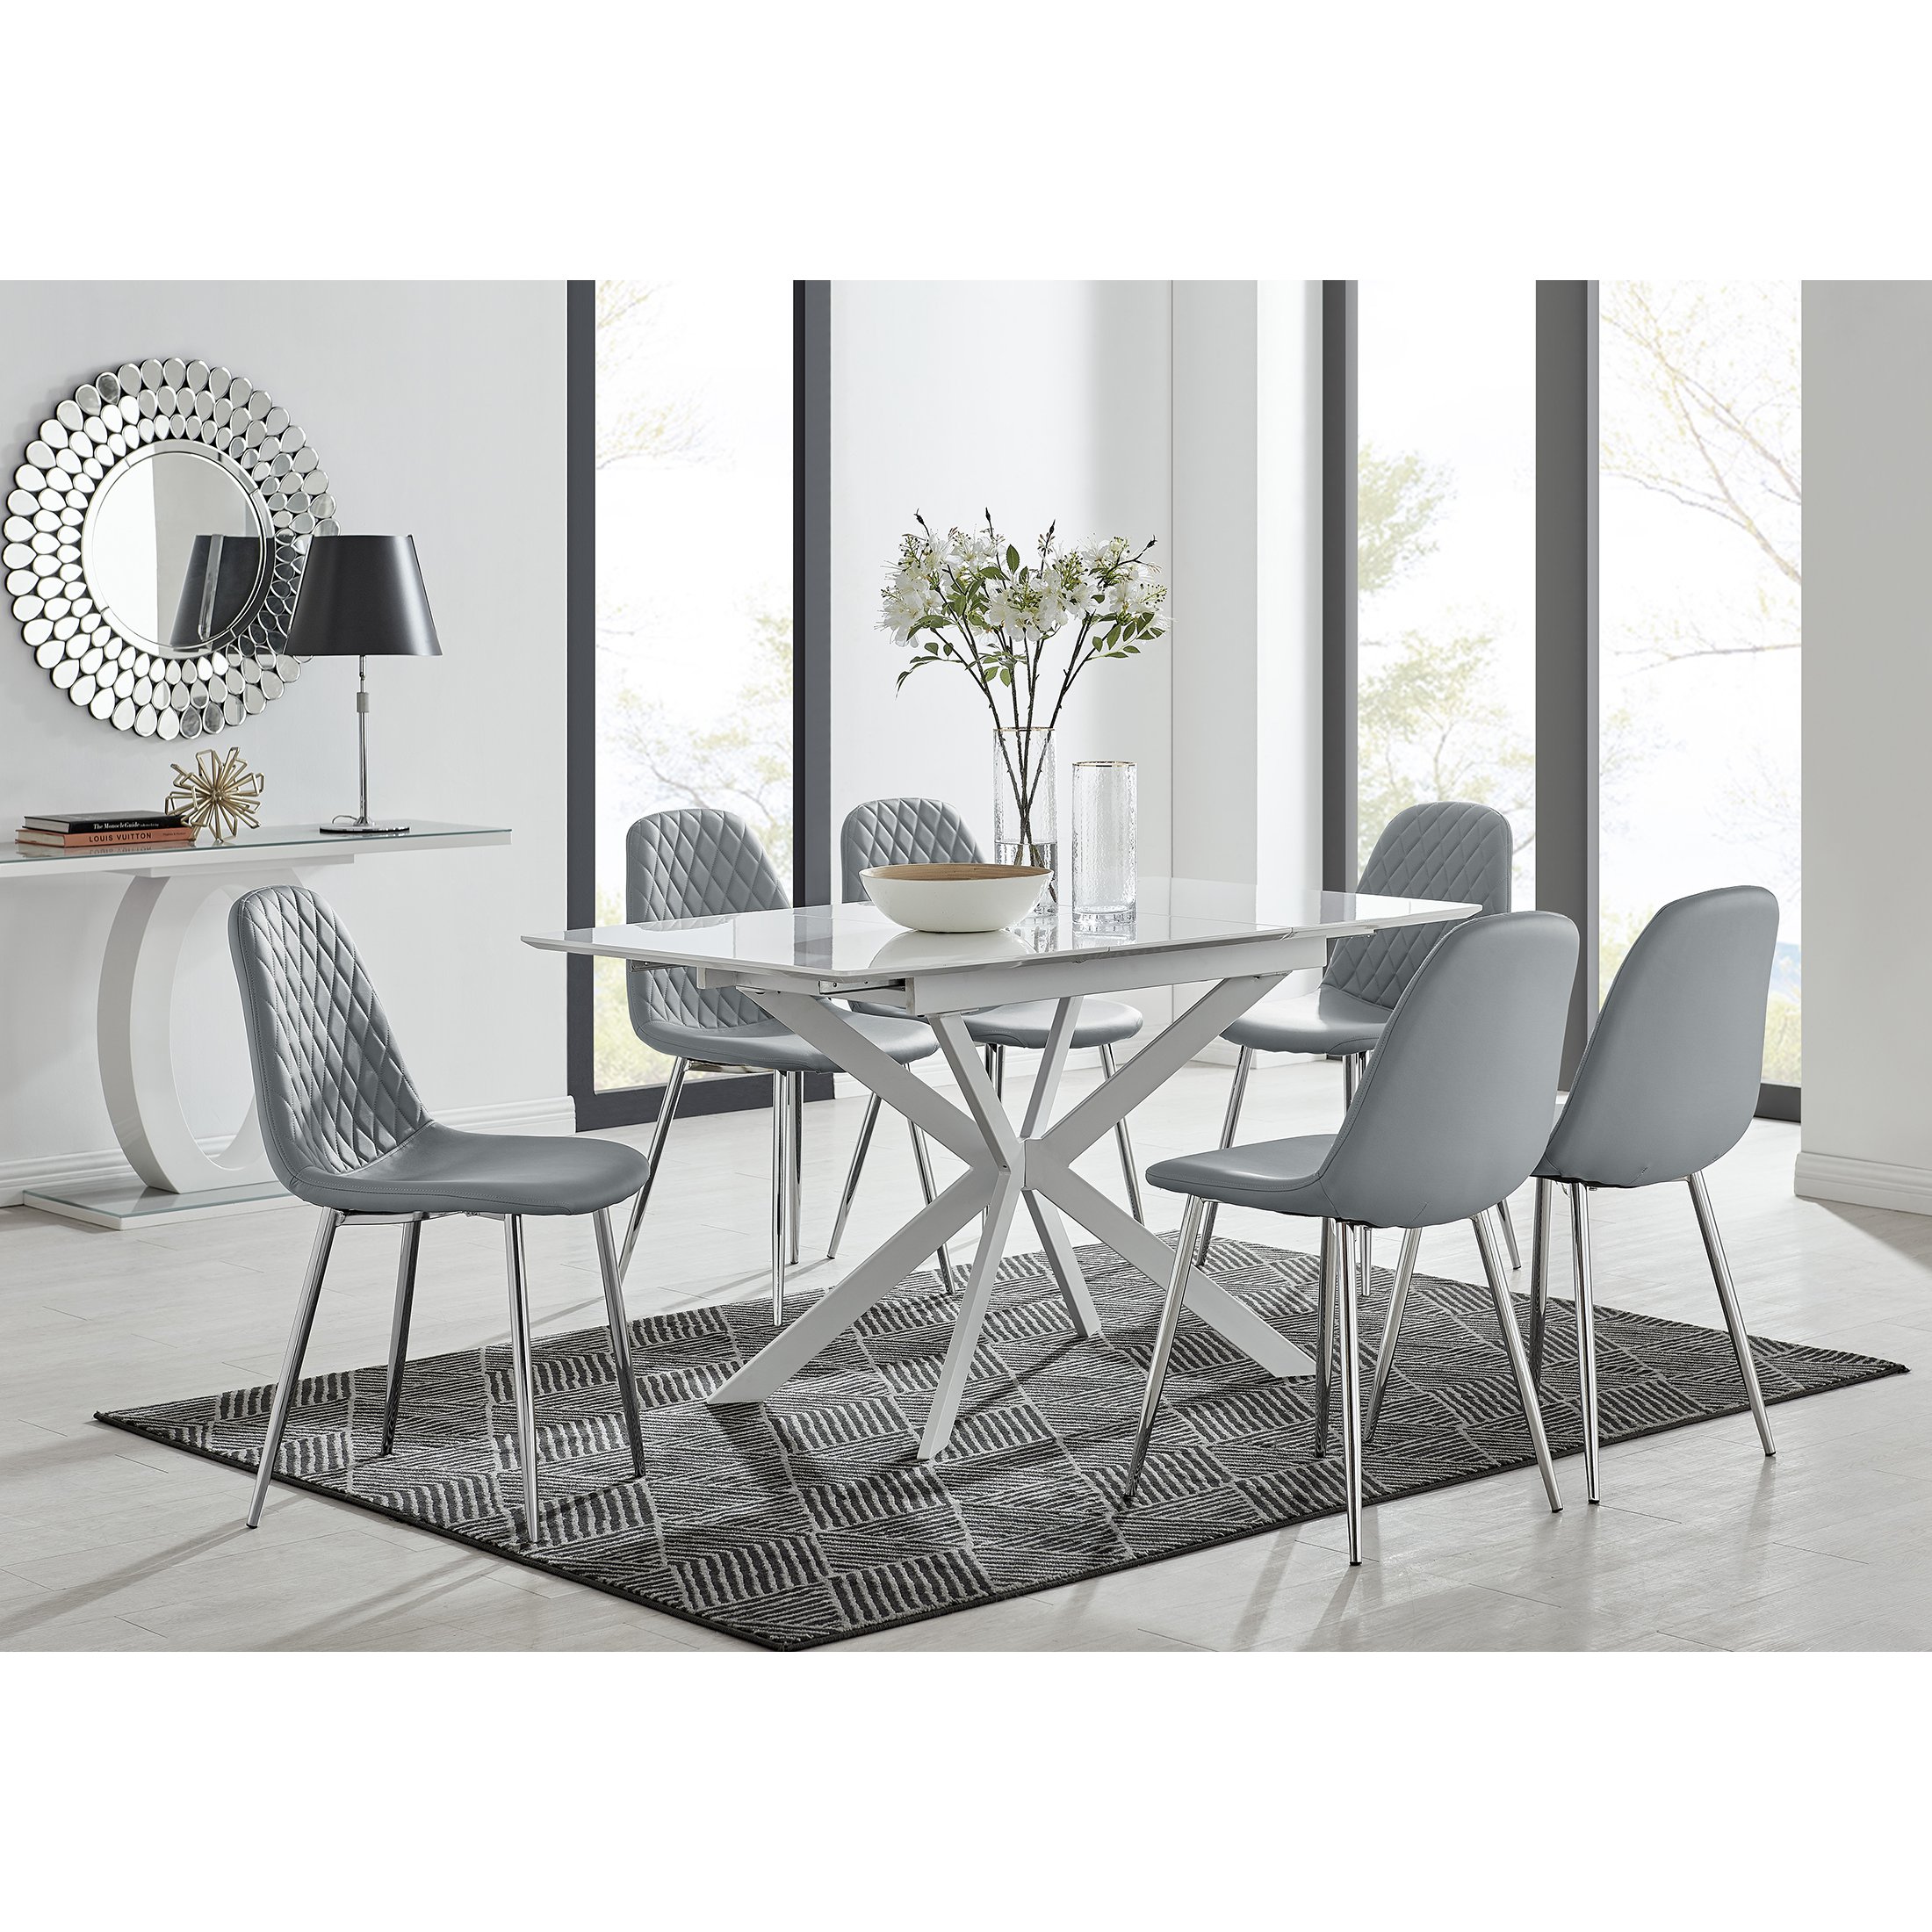 Nova Square Chrome and Glass Dining Table with 2 4 Renzo Black Chairs 